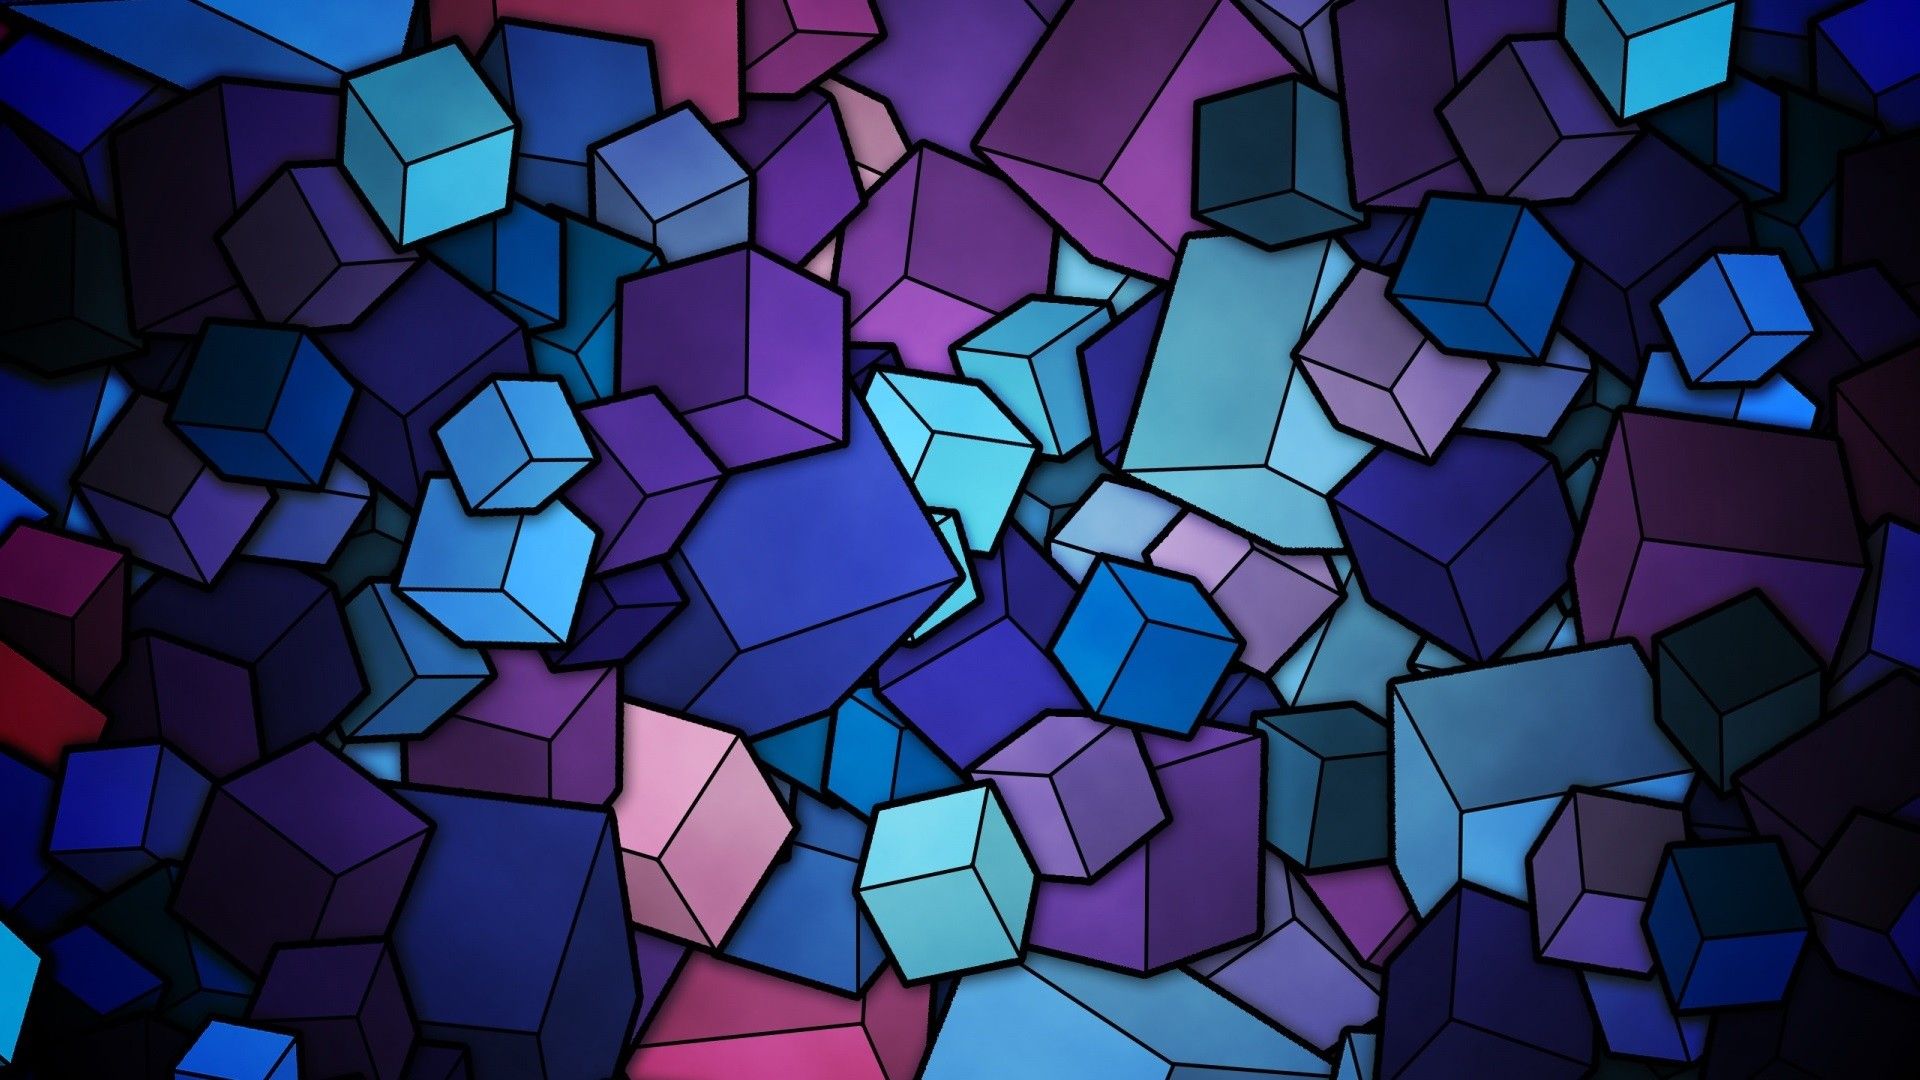 Stained Glass Geometry Cubes HD Wallpaper FullHDwpp Full